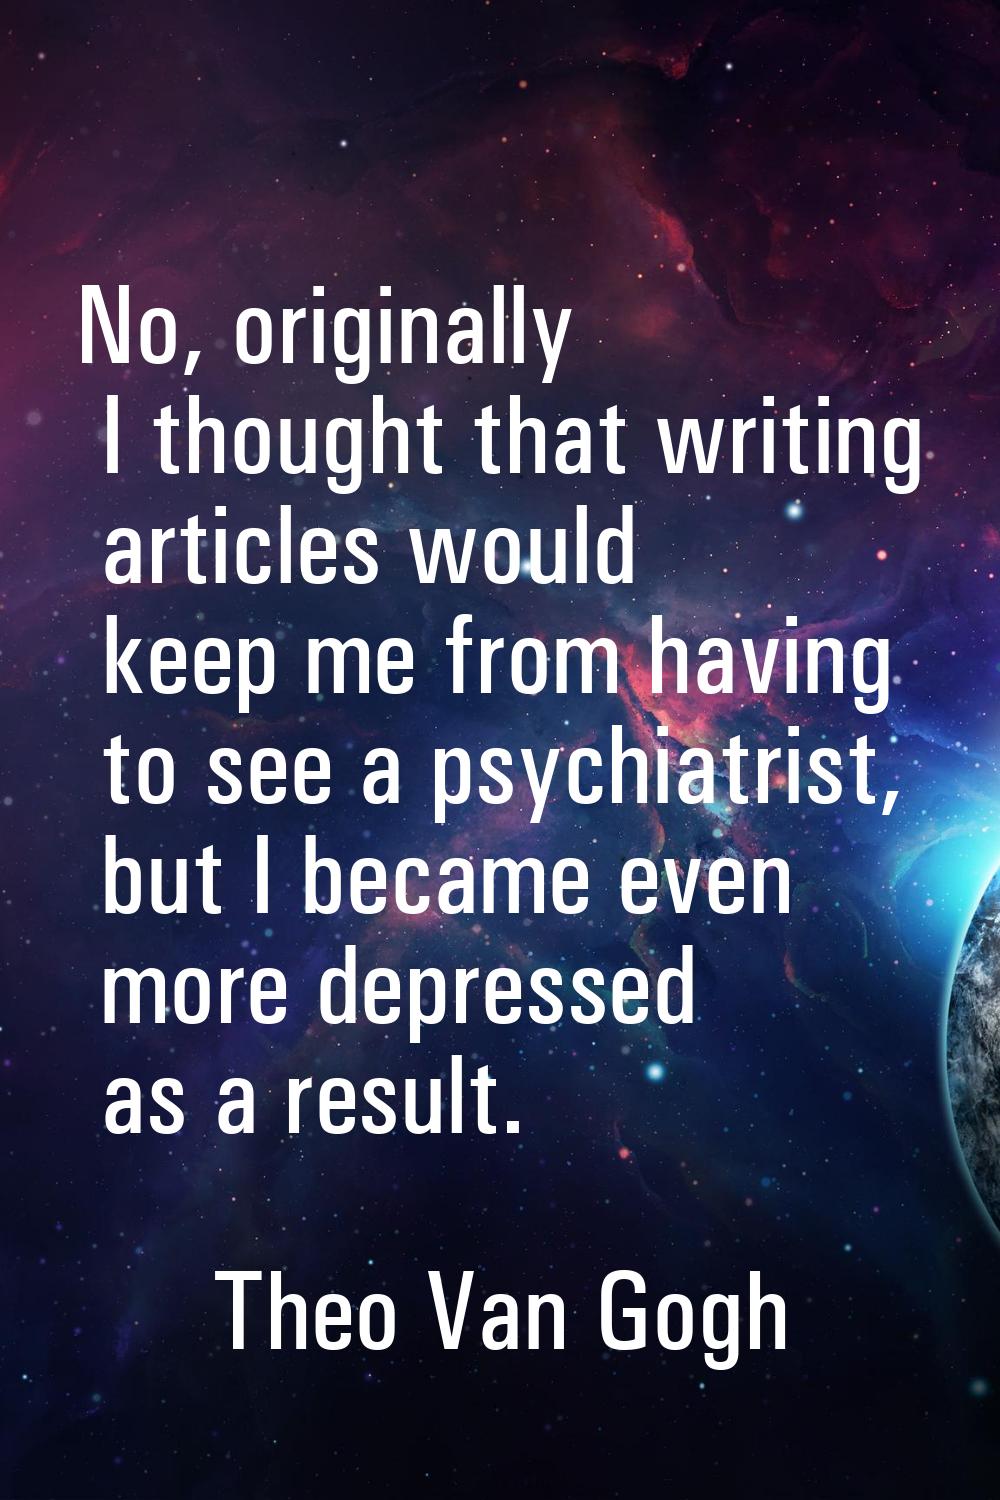 No, originally I thought that writing articles would keep me from having to see a psychiatrist, but